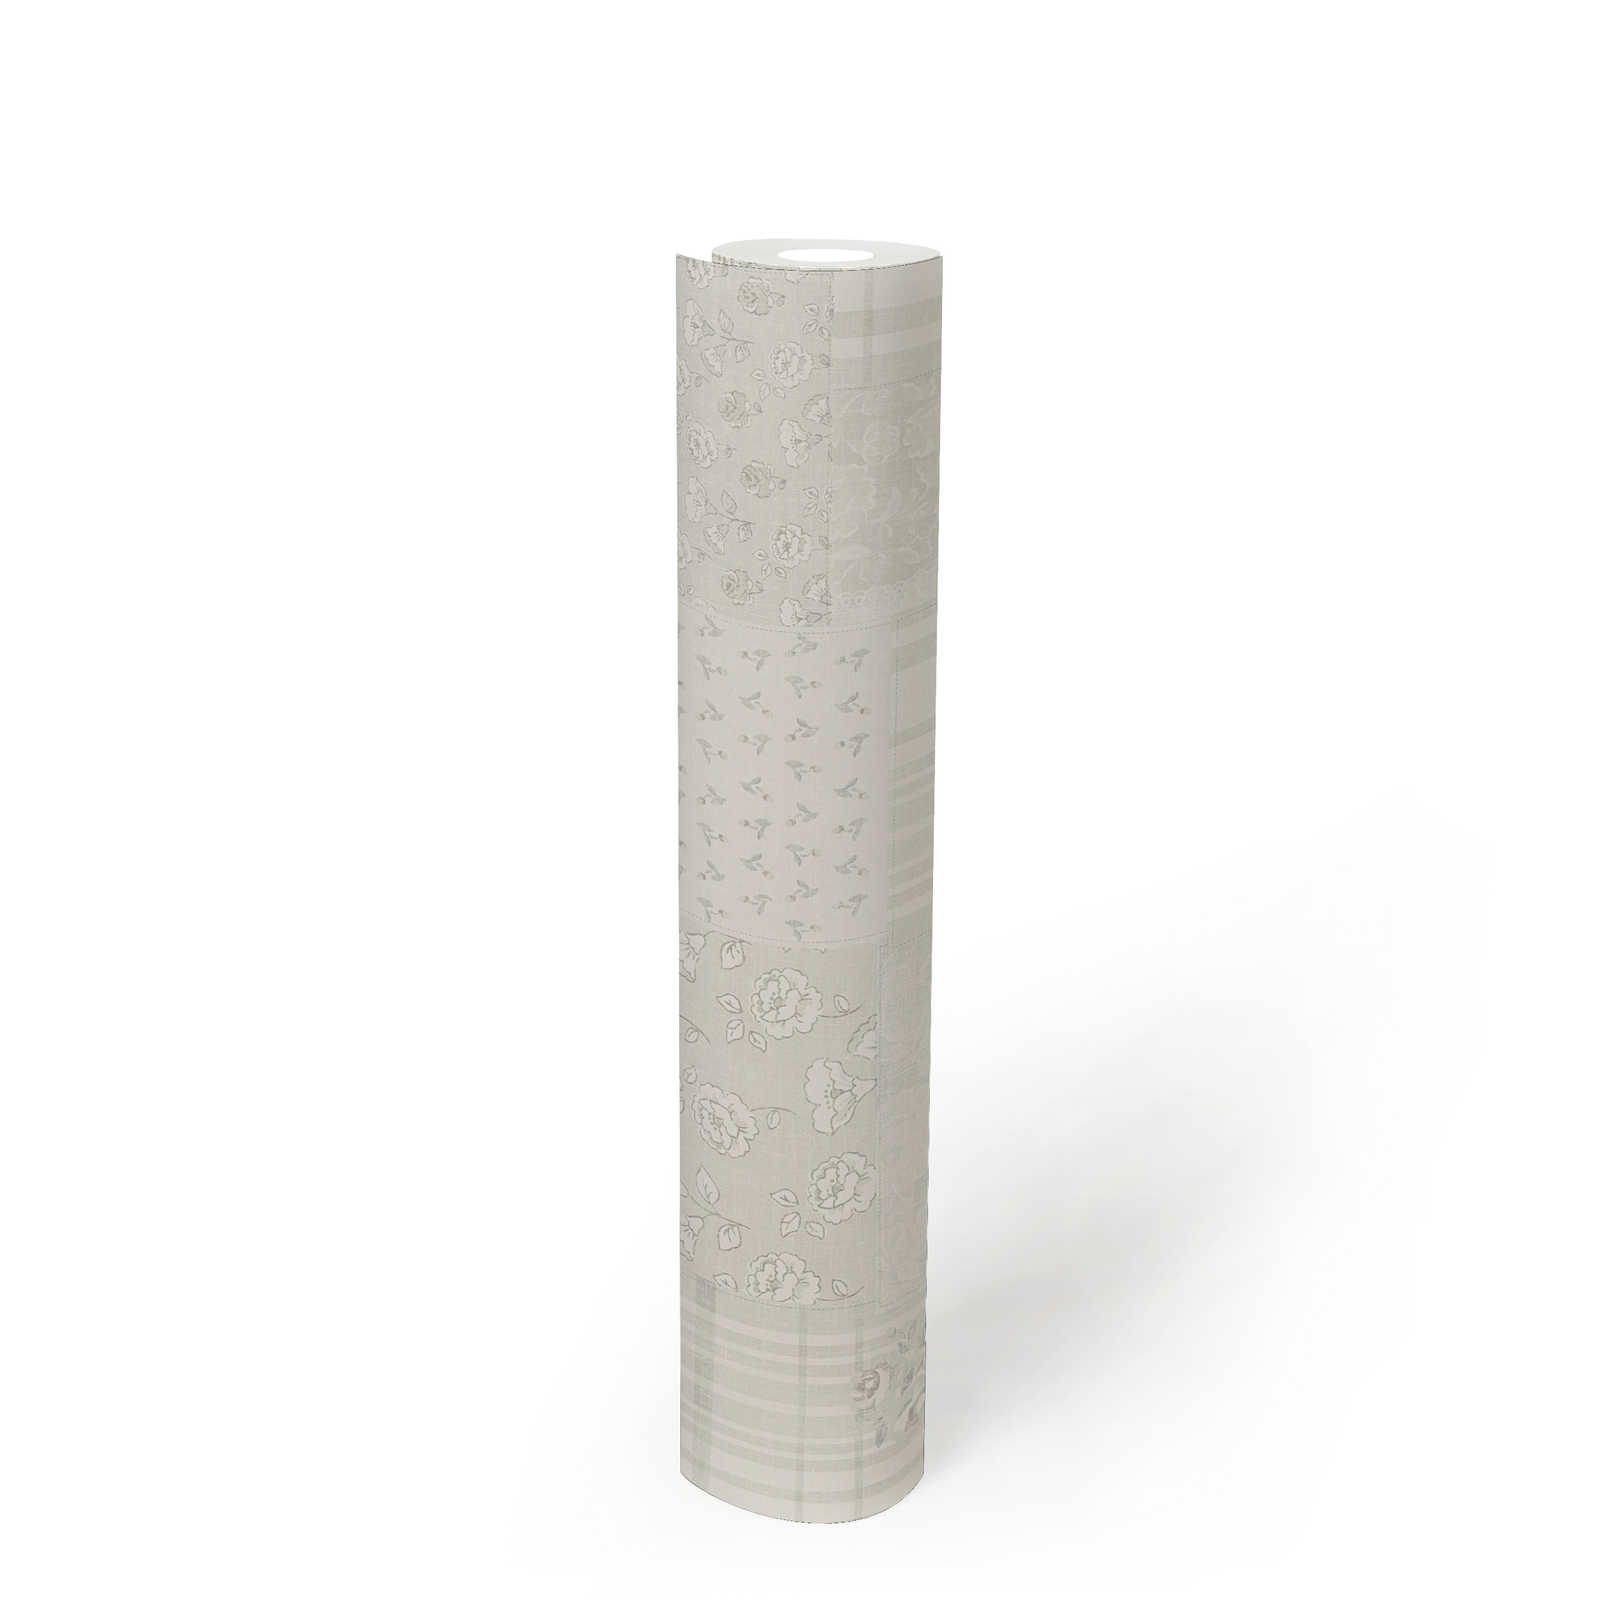             Non-woven wallpaper with floral pattern country style - grey, white
        